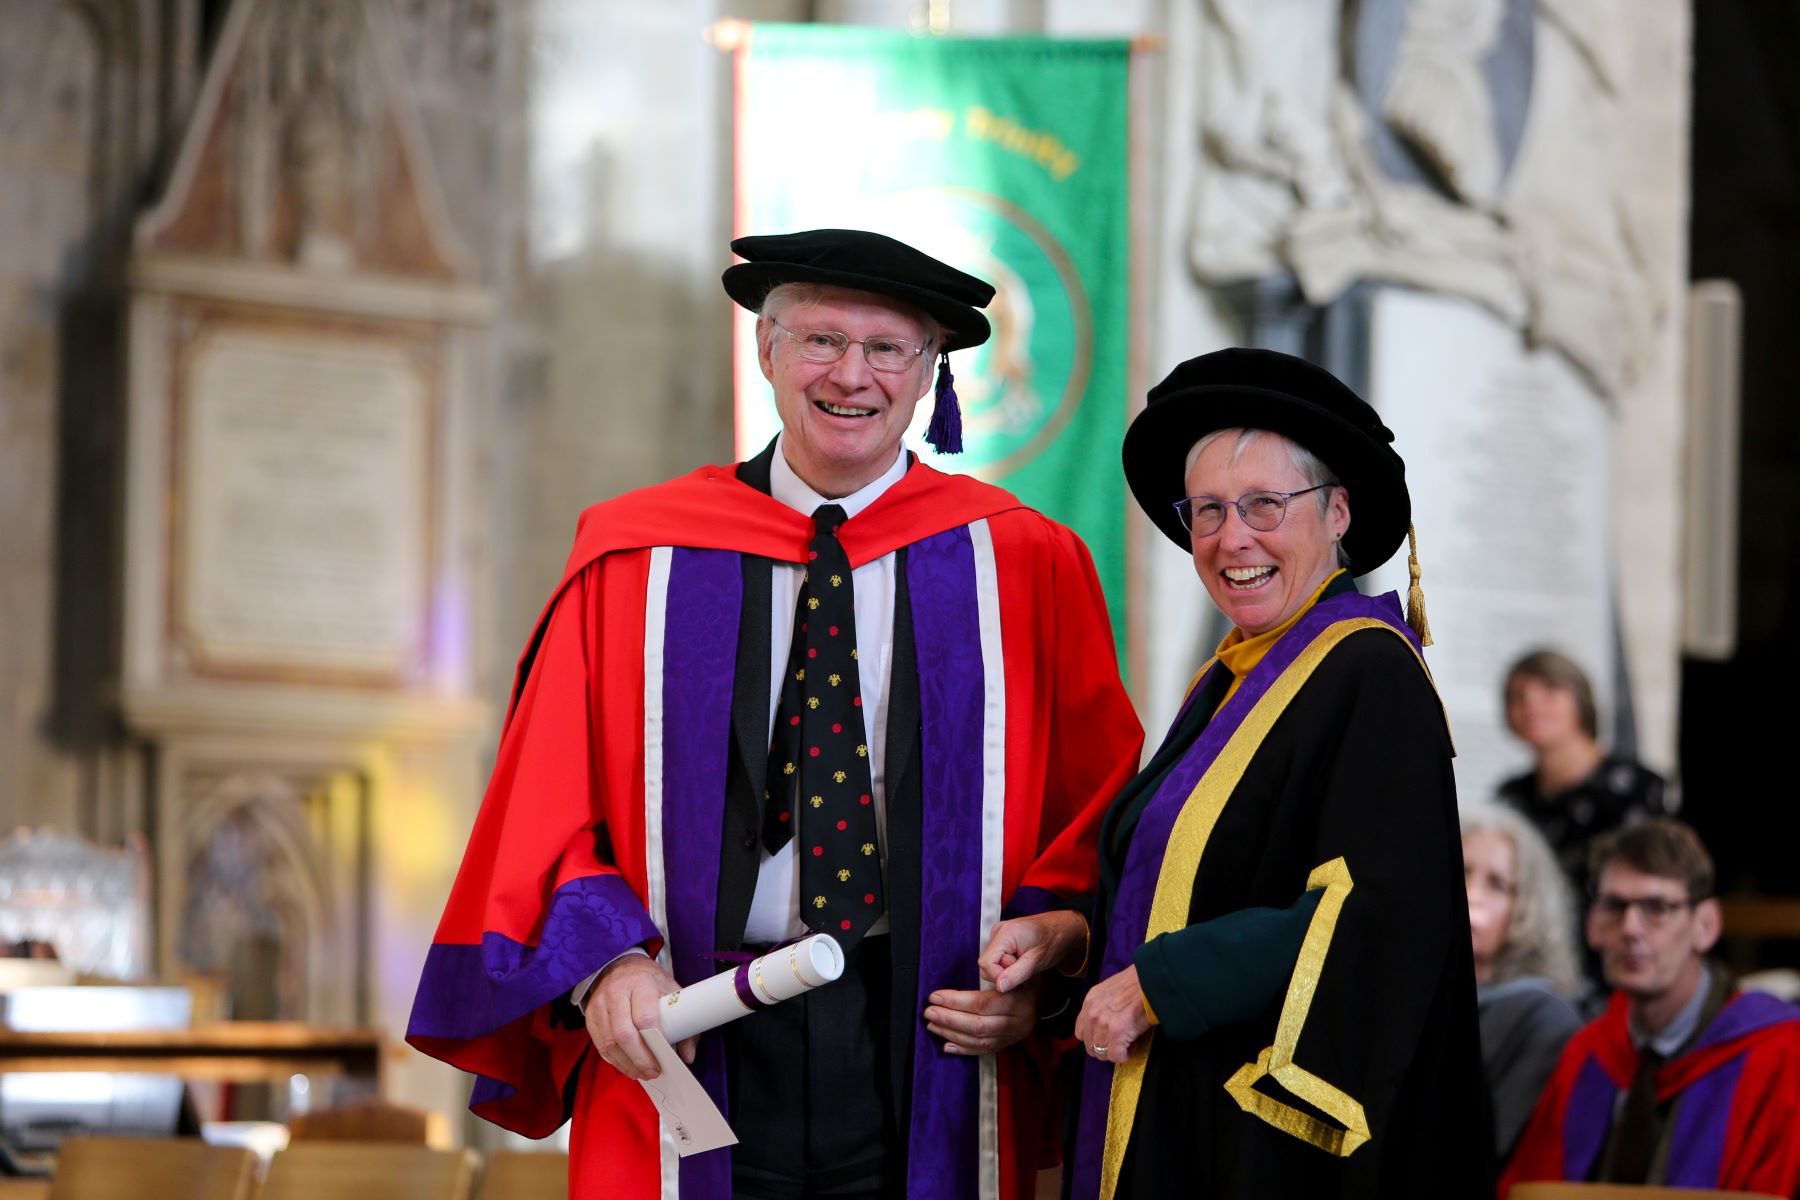 Man and woman in academic robes